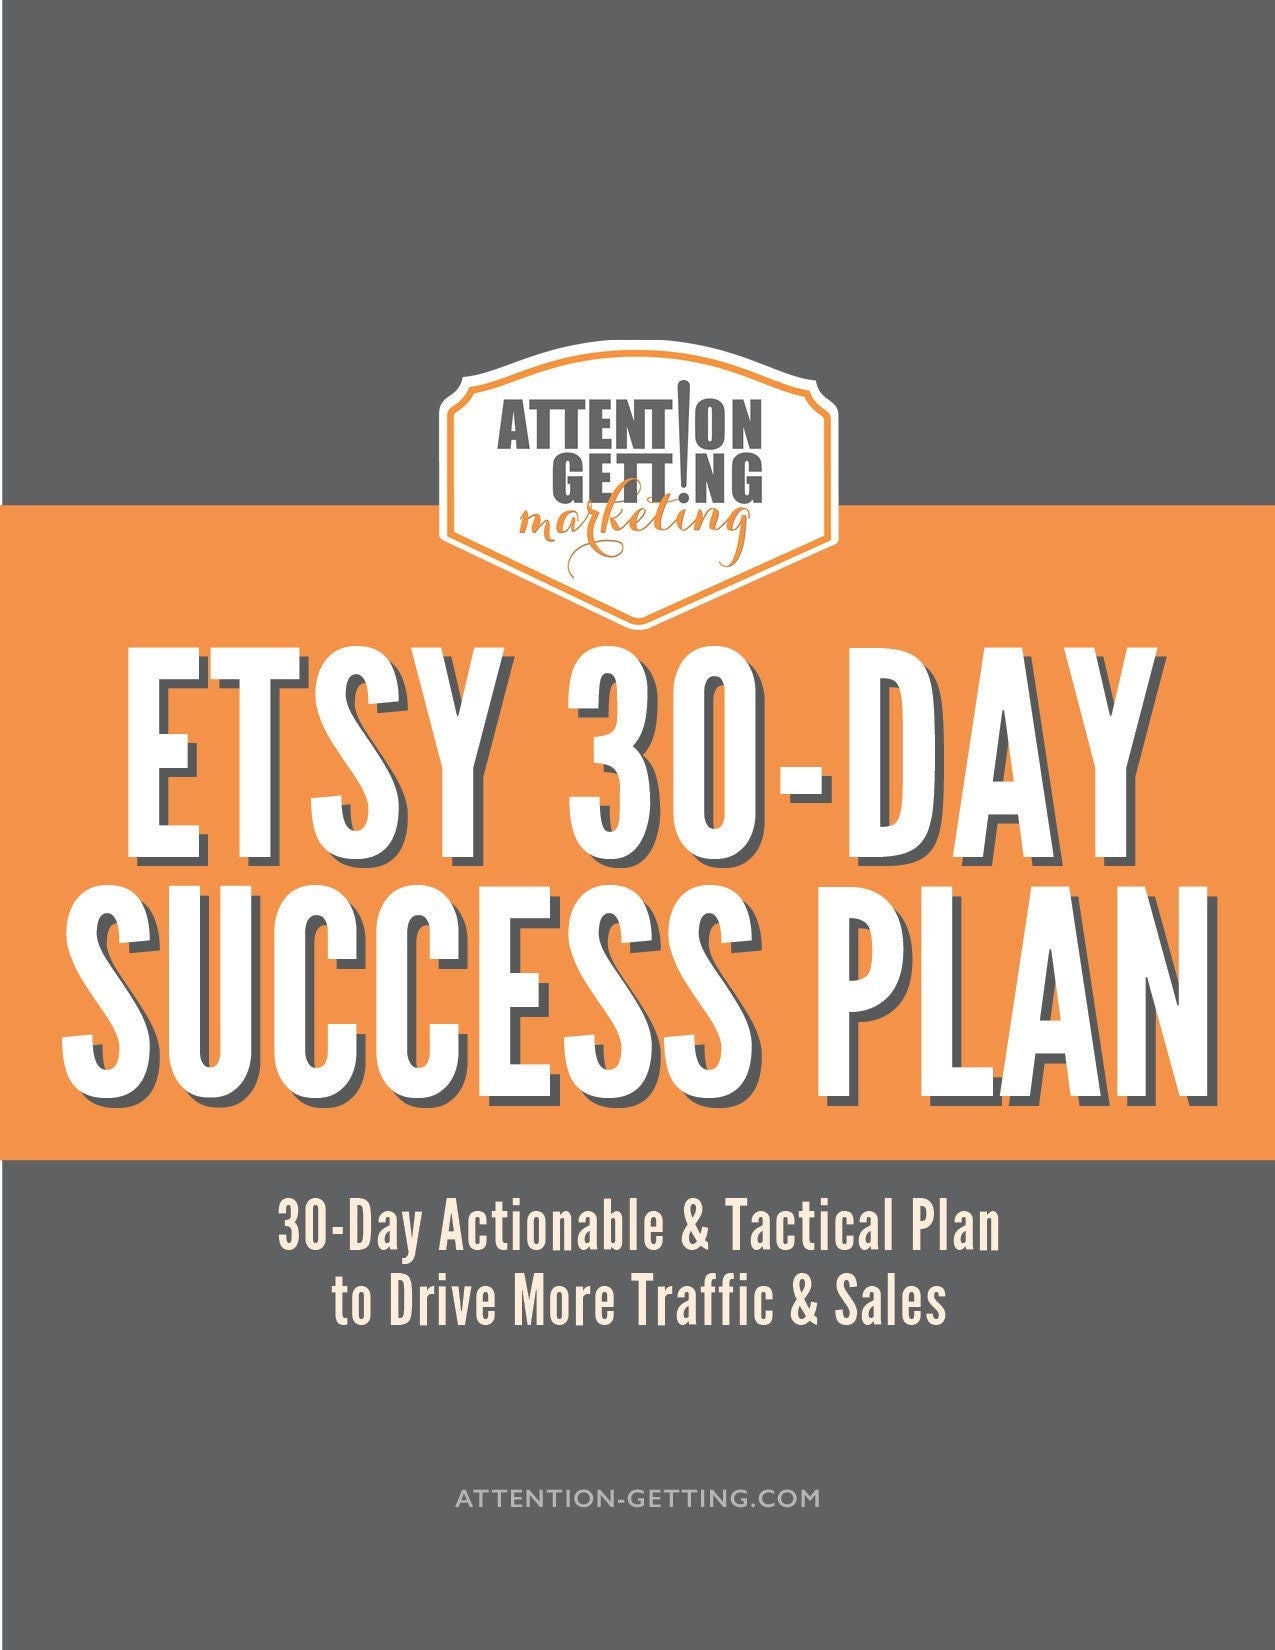 Etsy 30 Day Success Plan for Etsy shop owners providing help with marketing and SEO